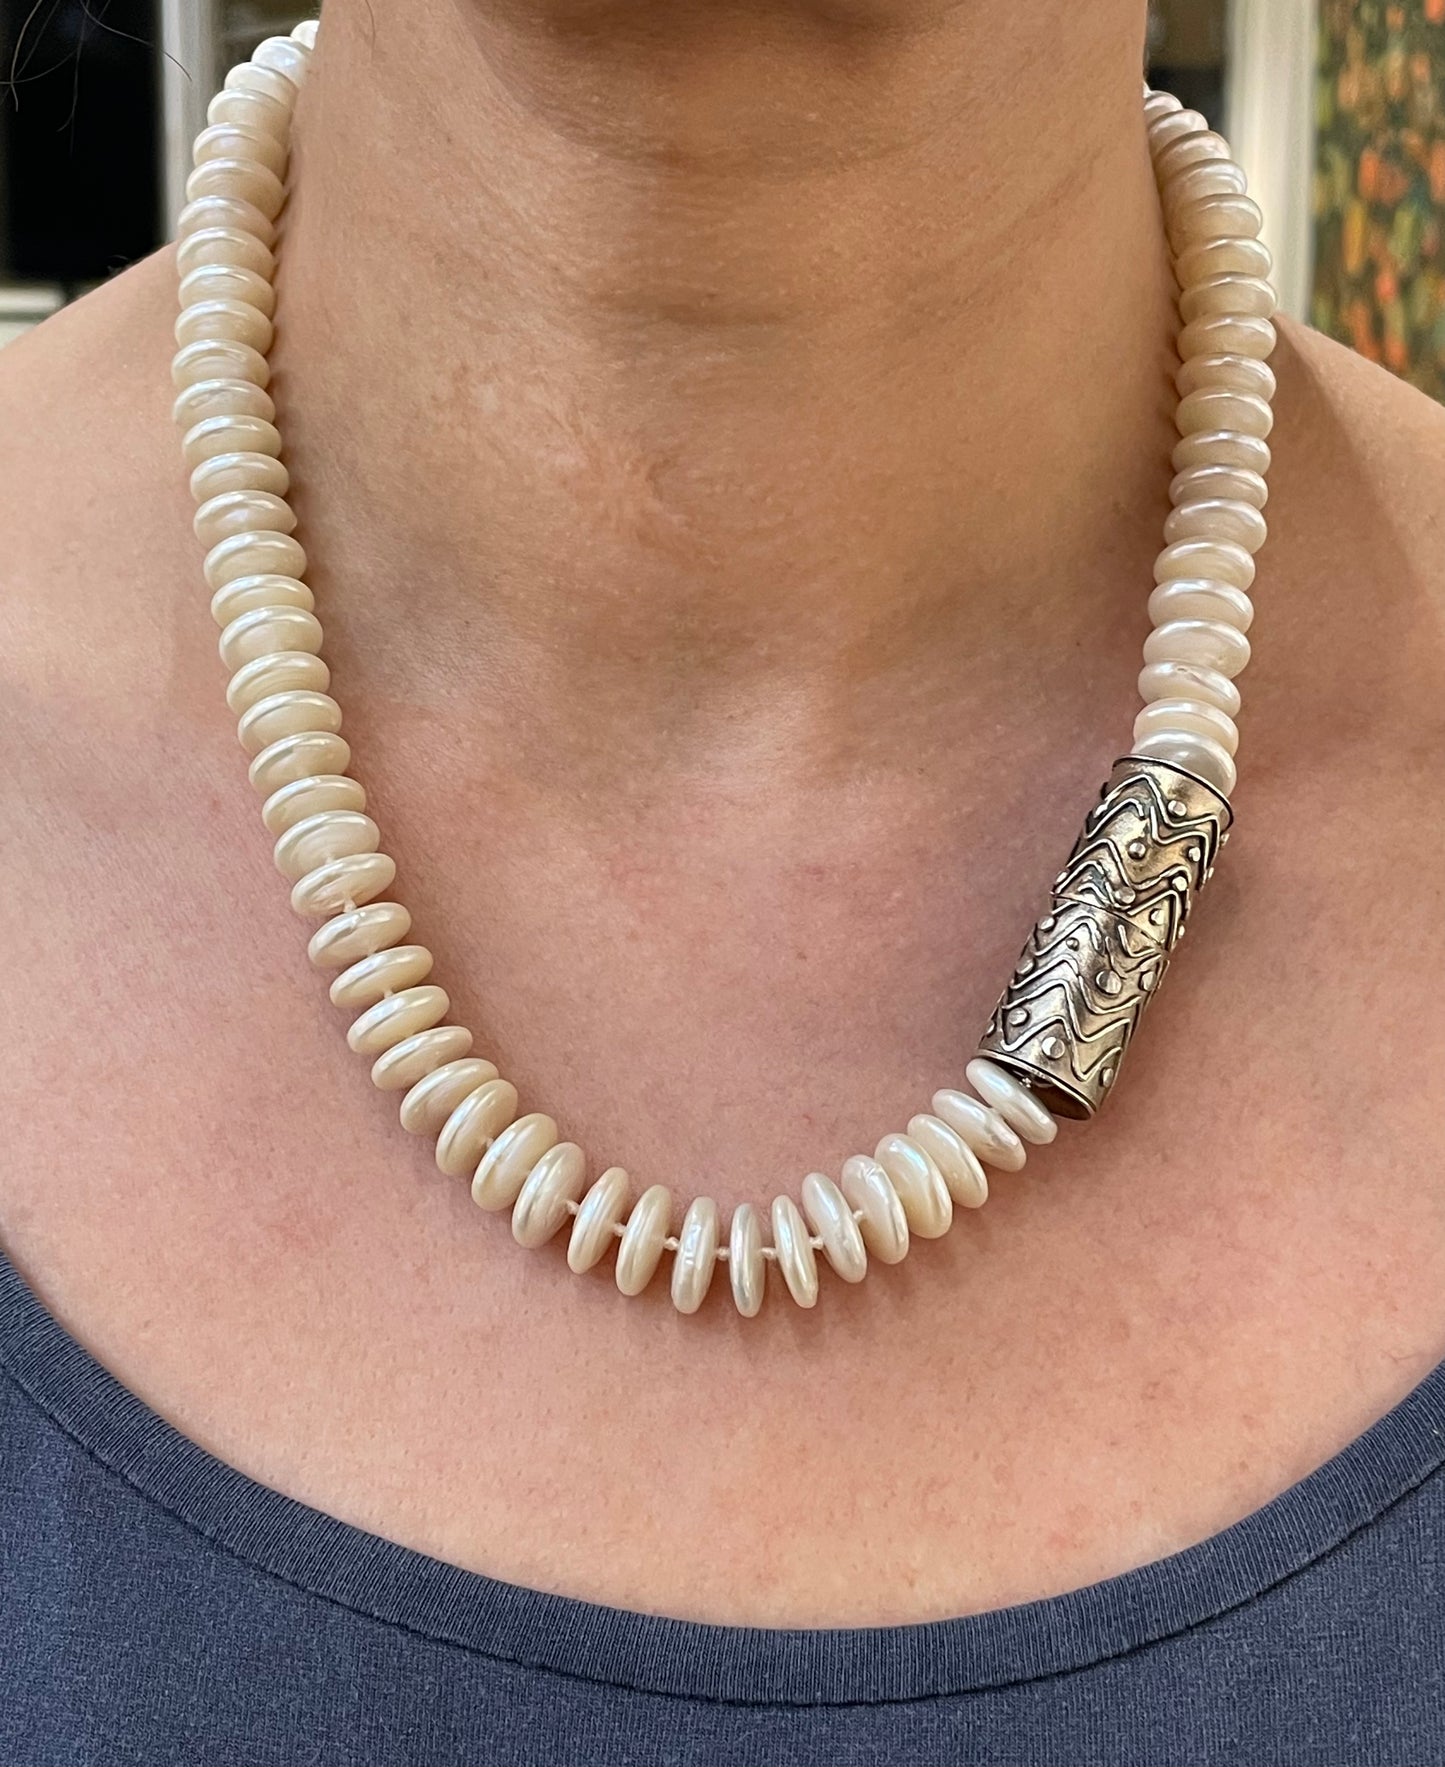 Coin pearl necklace with handmade fine silver clasp